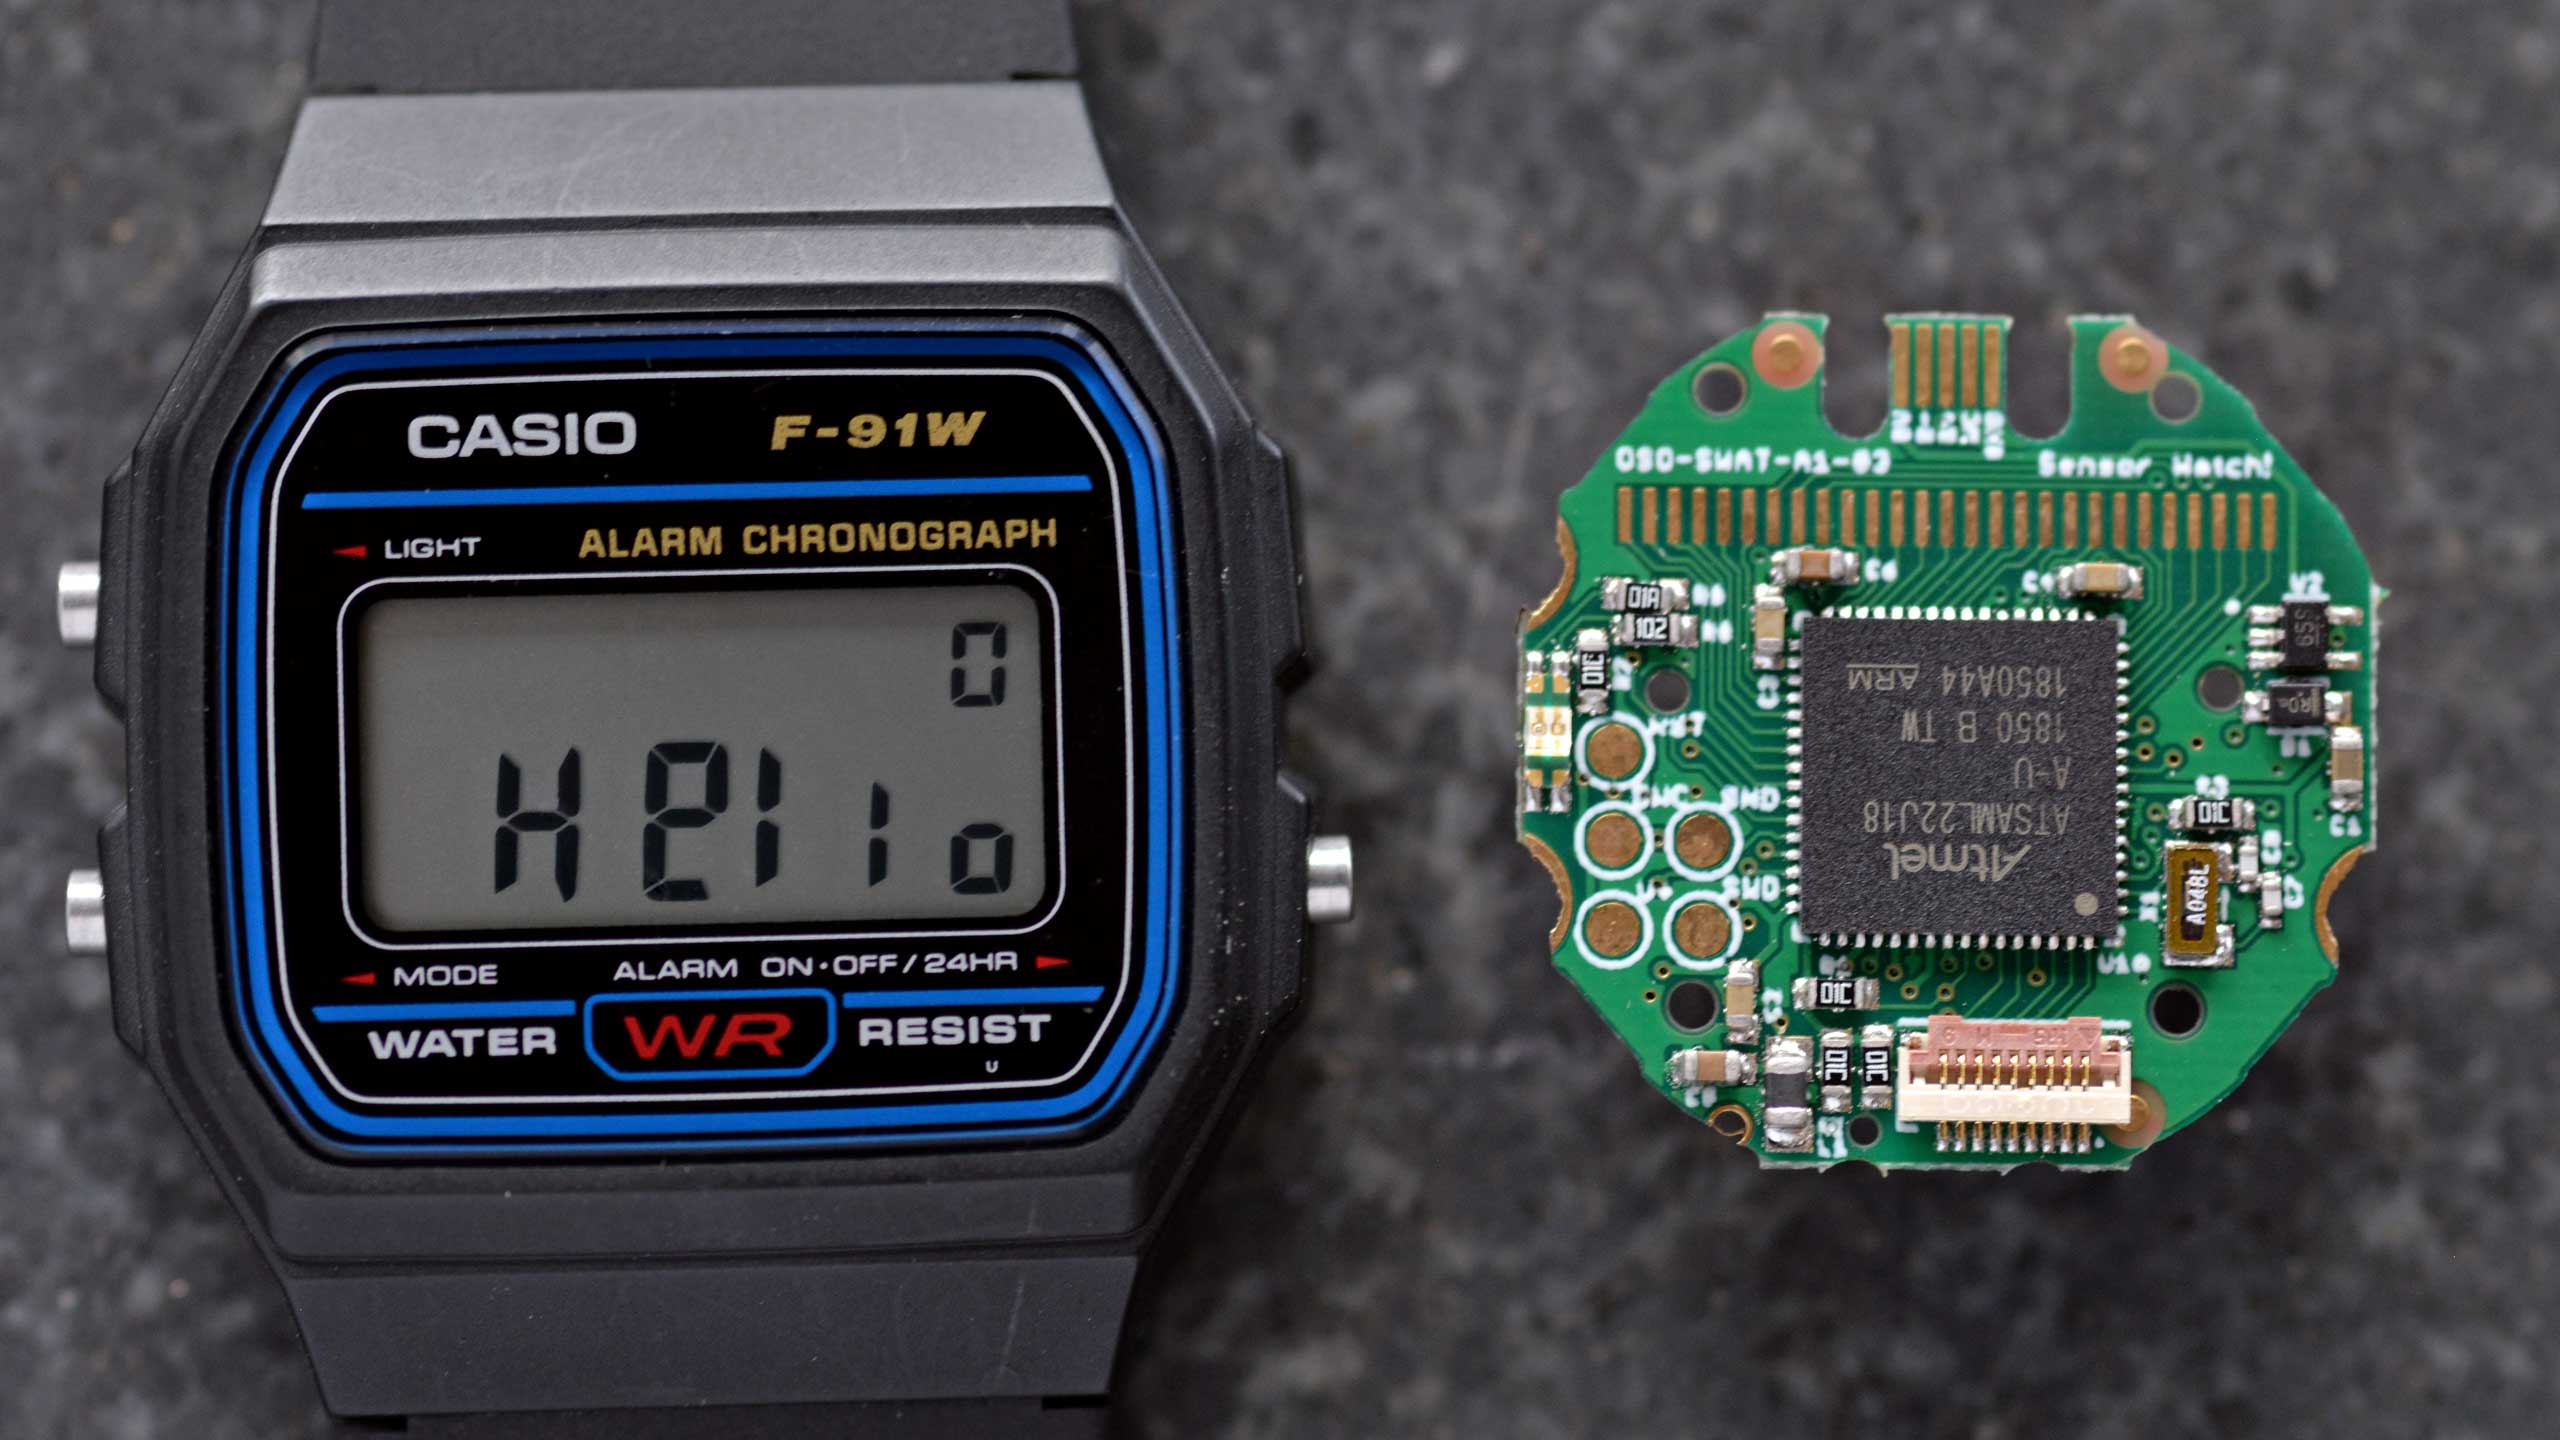 Photo: a close-up of the Sensor Watch circuit board, and a wristwatch displaying the word “Hello”